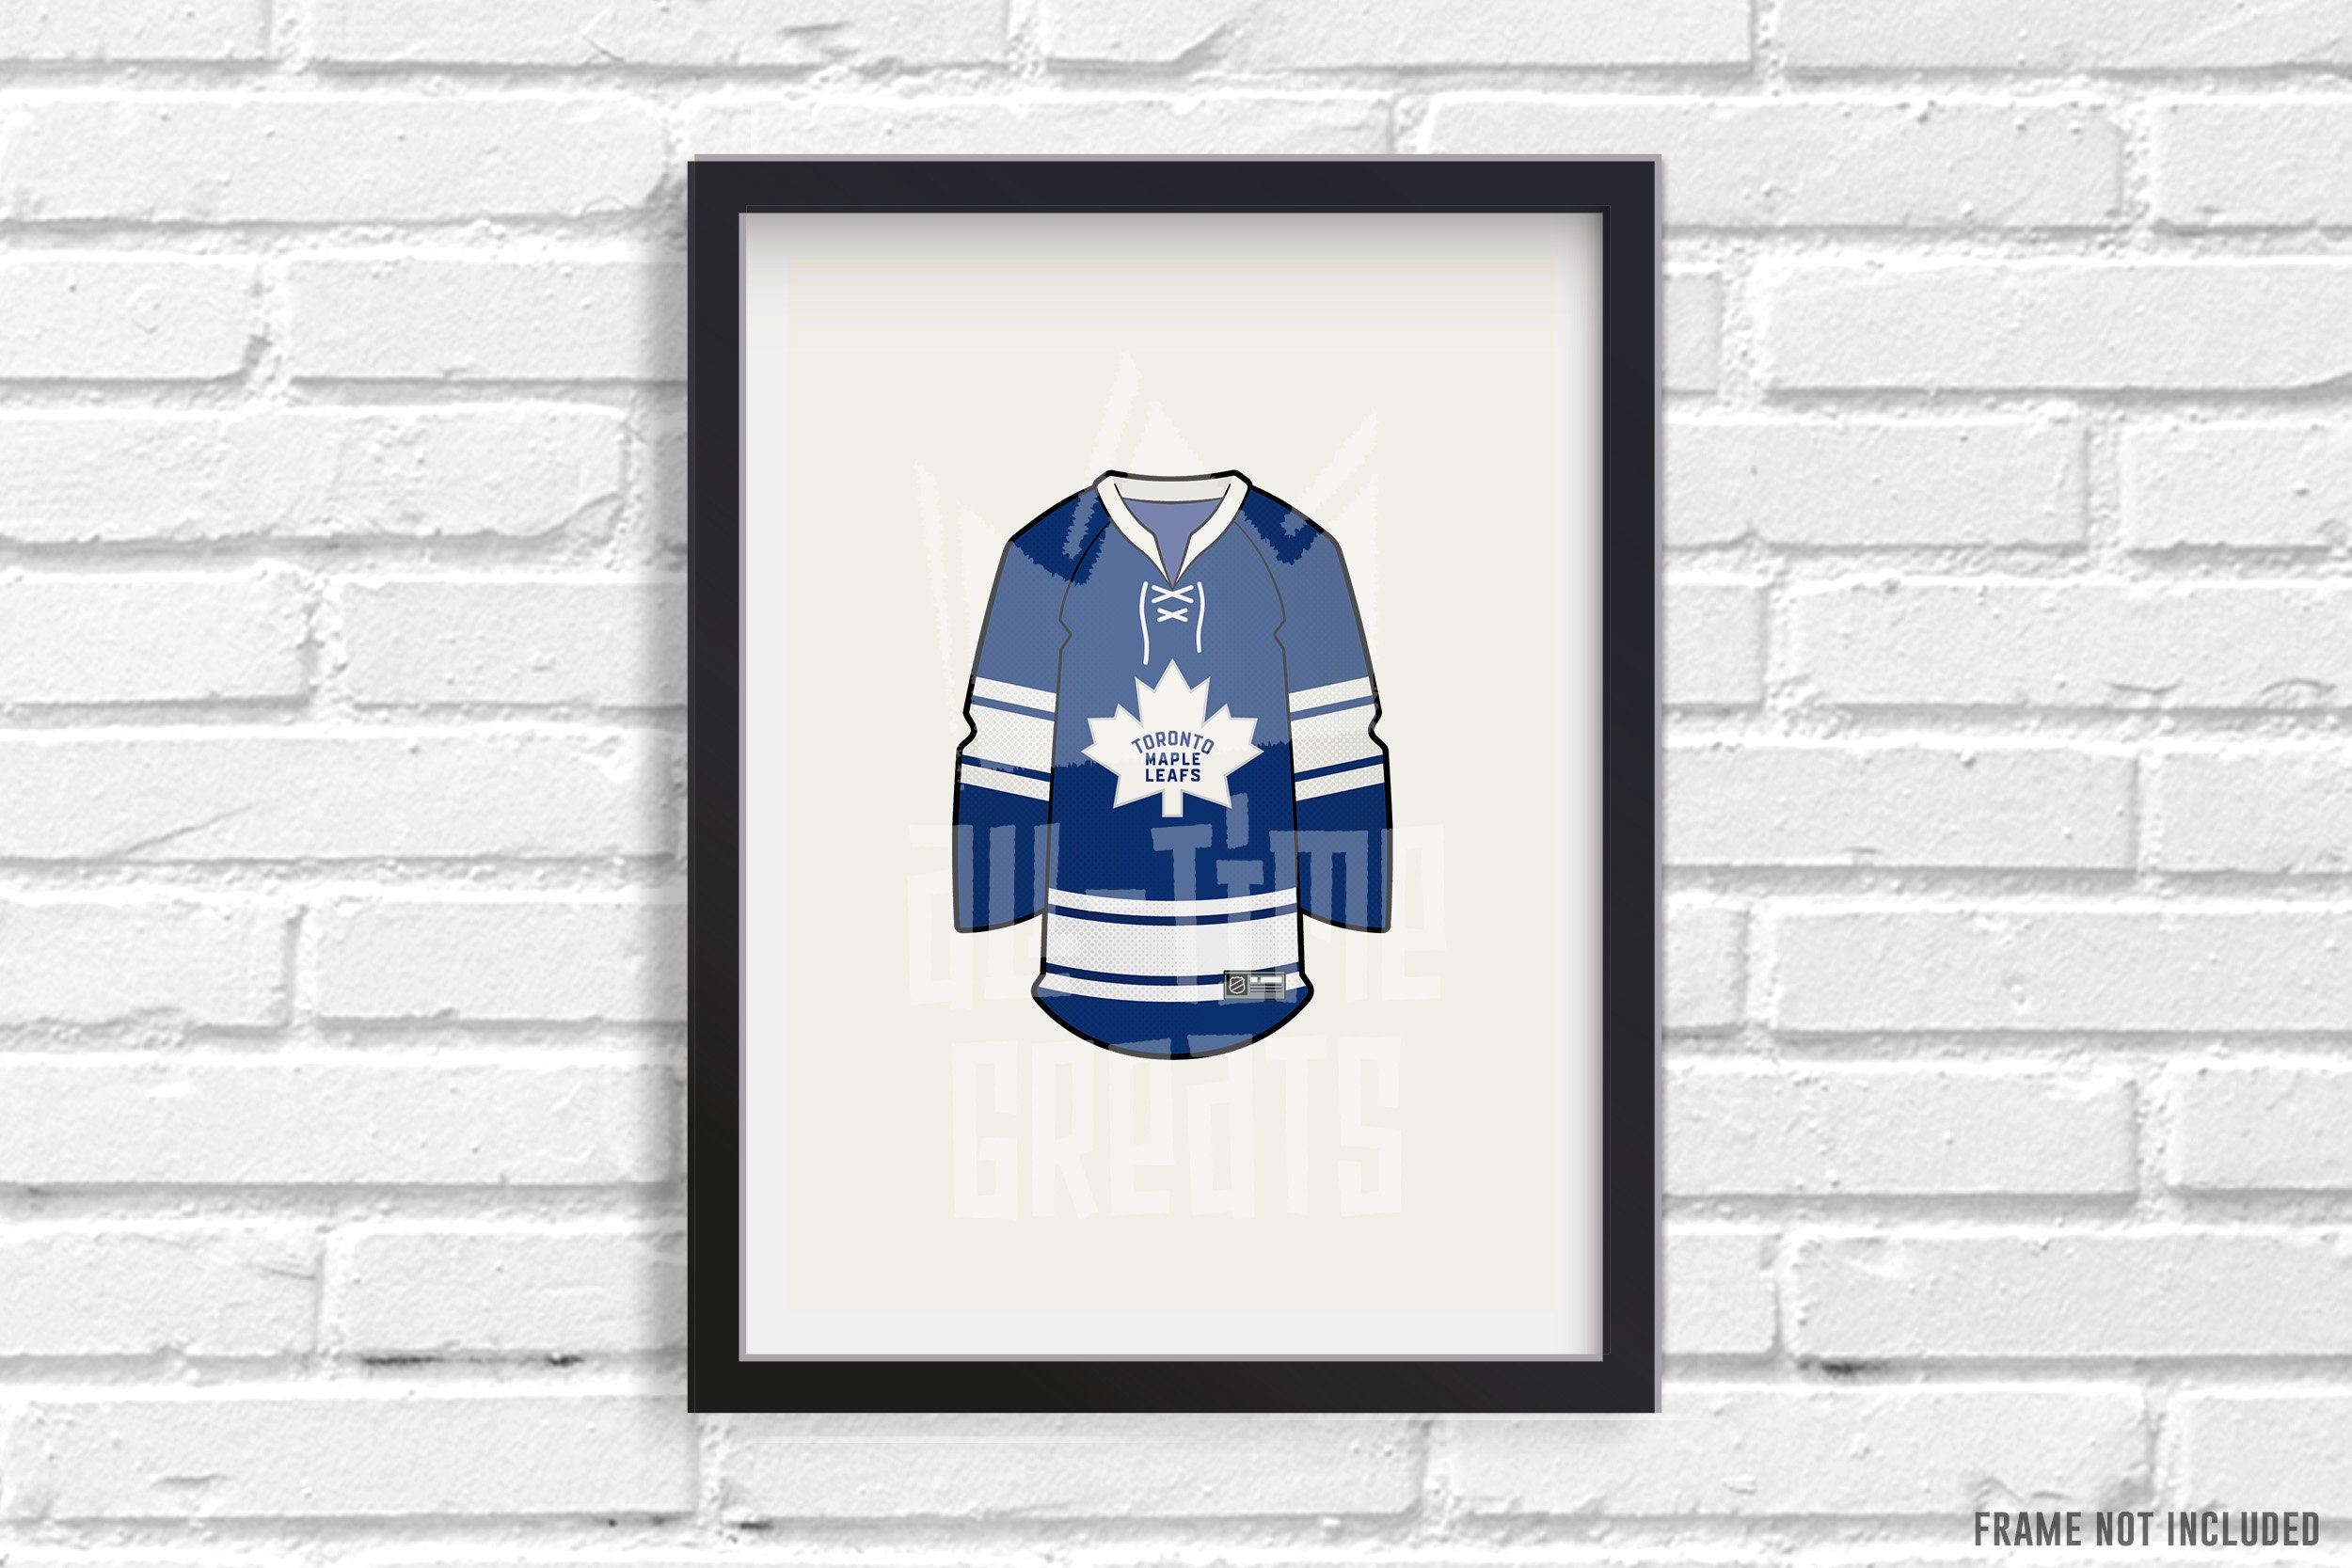 FRAMED TORONTO MAPLE LEAFS ROAD JERSEY LARGE BRAND NEW WITH 38